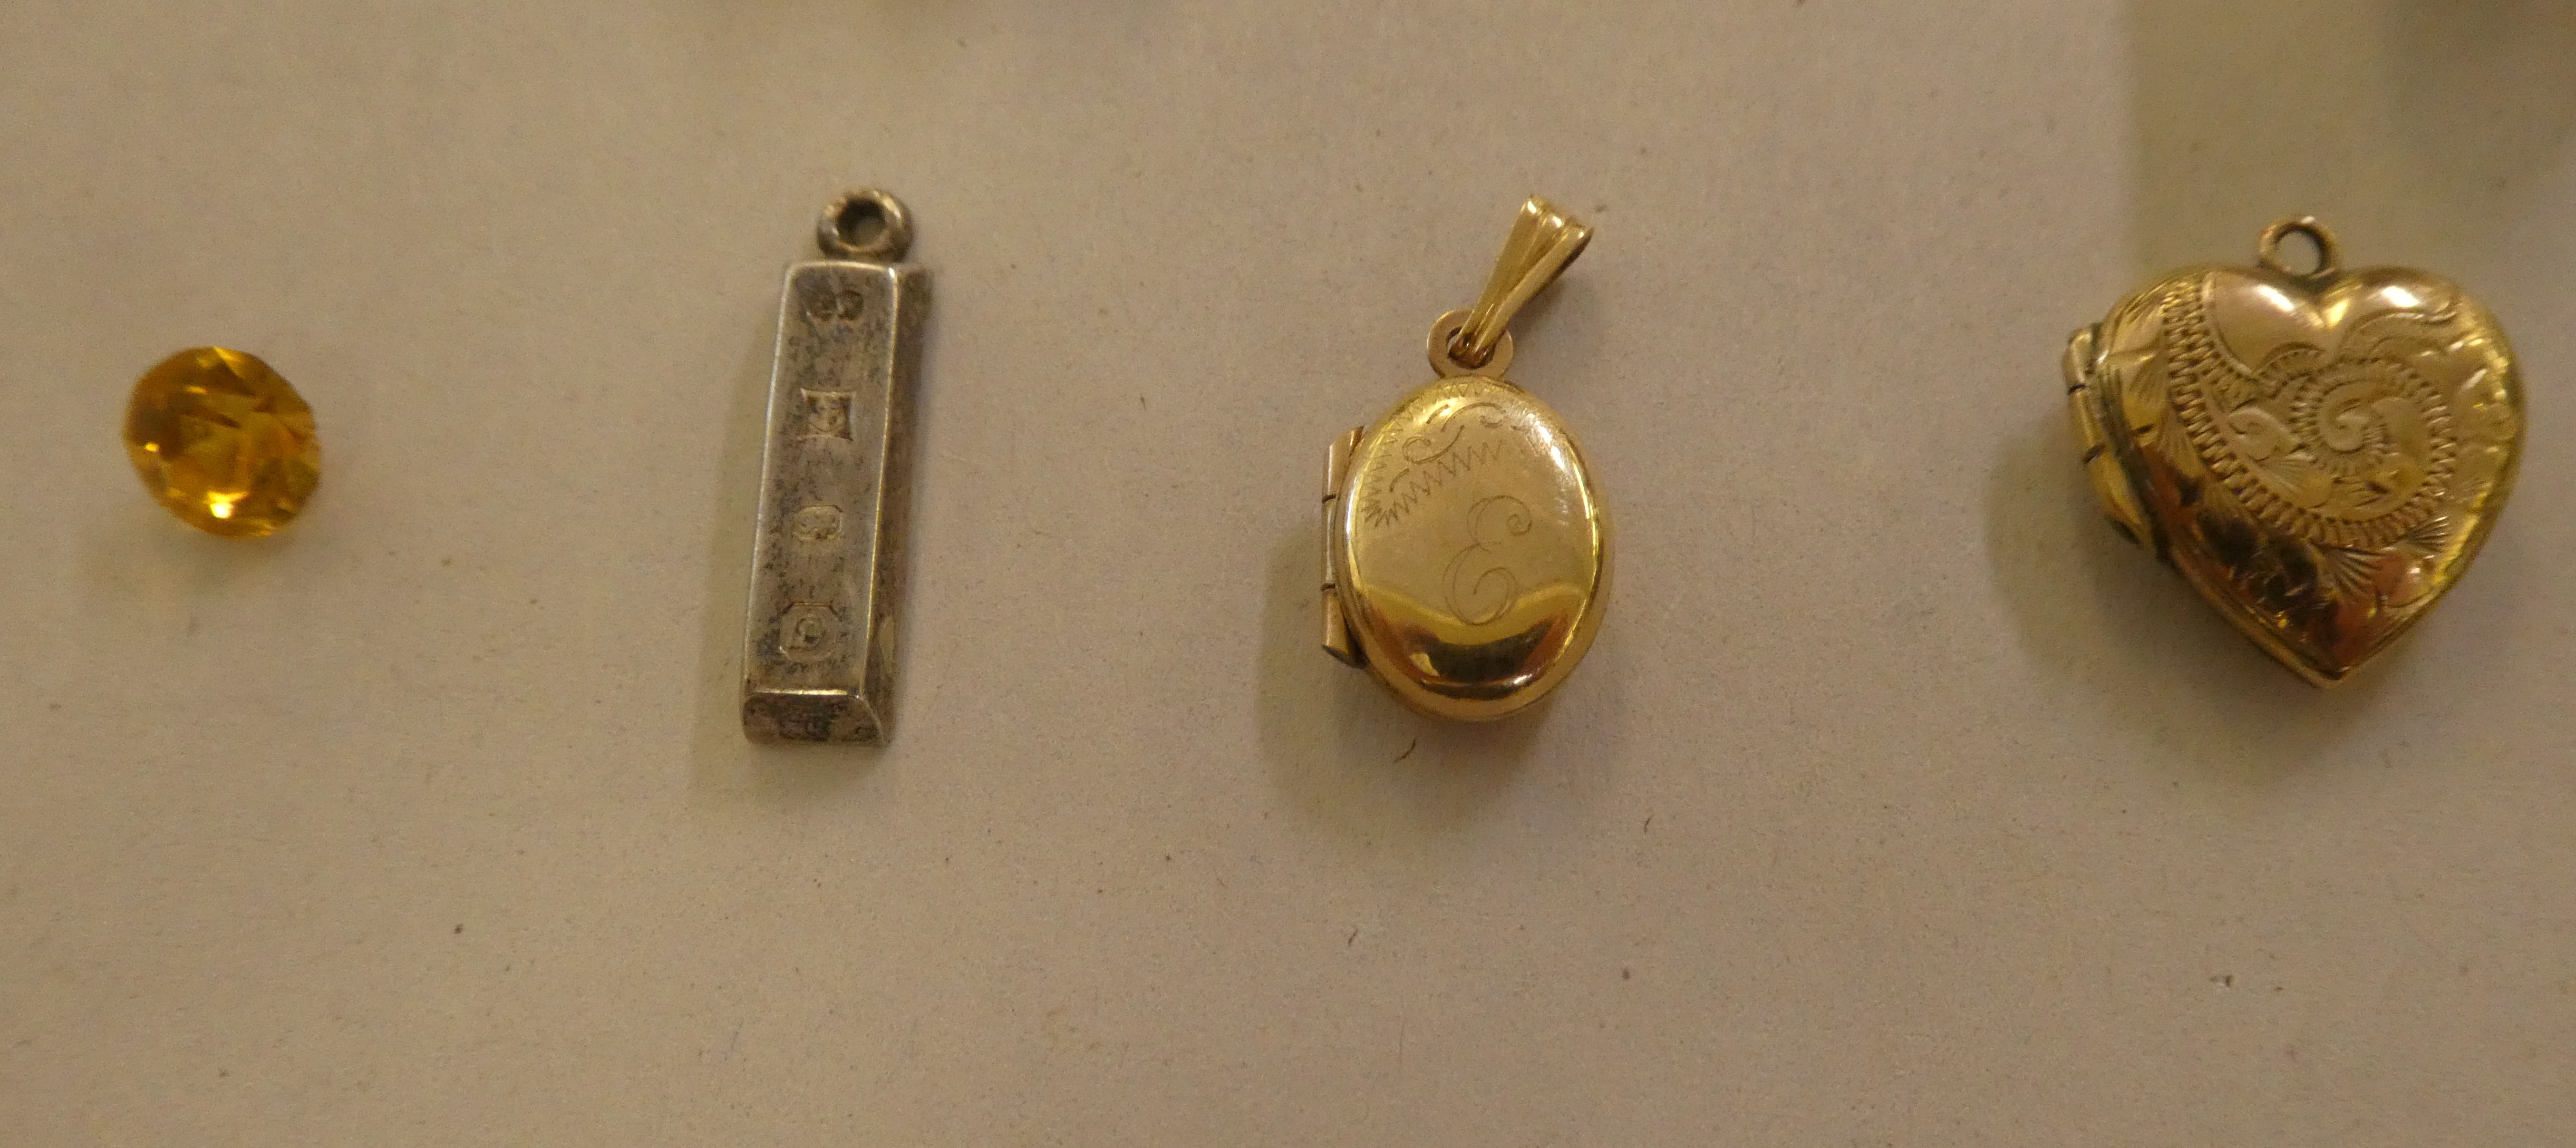 9ct gold, gold coloured and other metal bracelet charms - Image 4 of 9